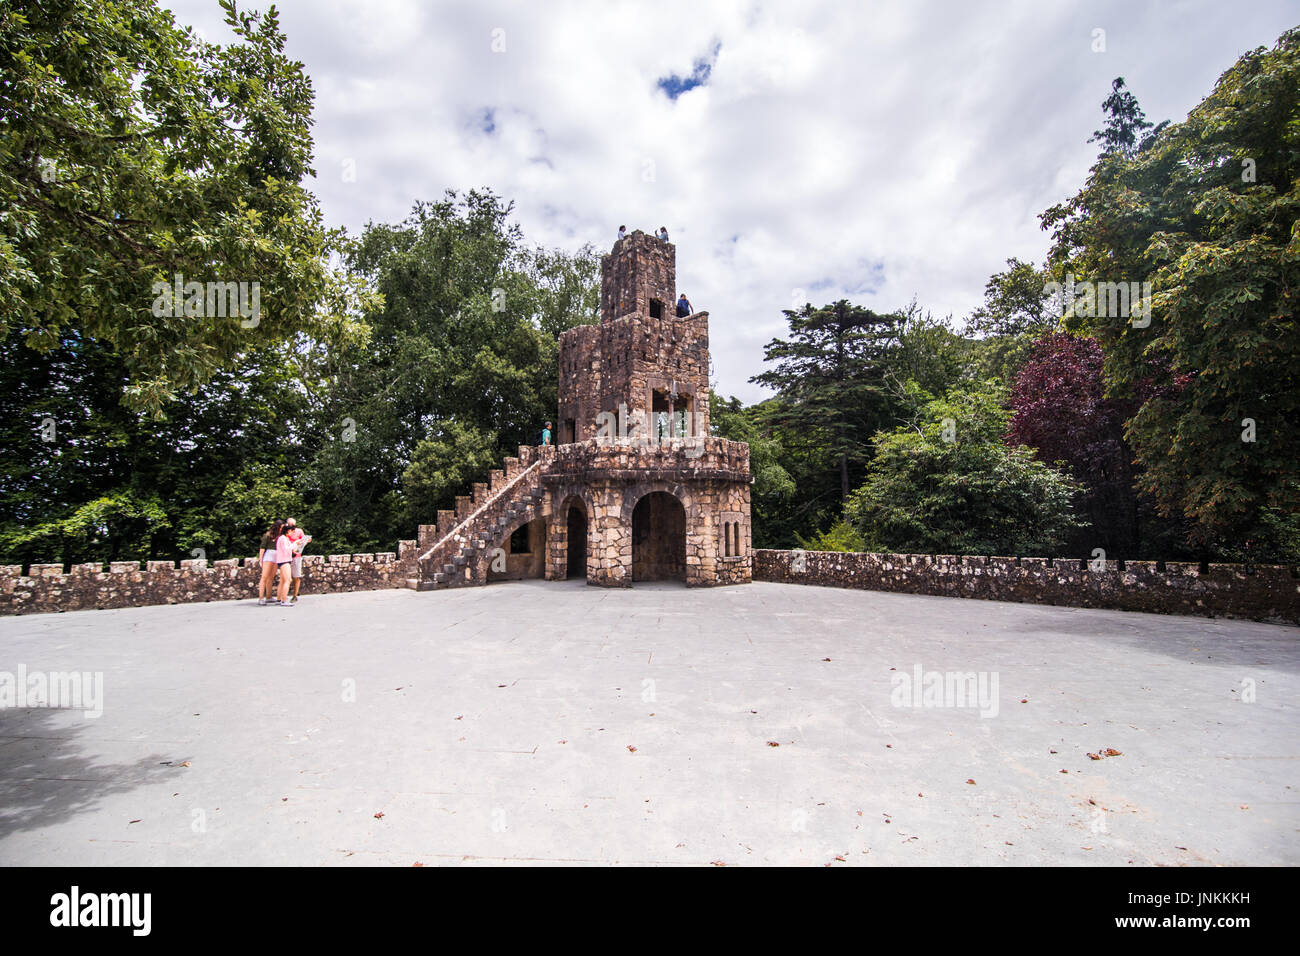 Portugal , Sintra . Palace Regaleira is typical Gothic architectural elements , such as turrets, gargoyles, and a tower in the shape of an octagon. Stock Photo